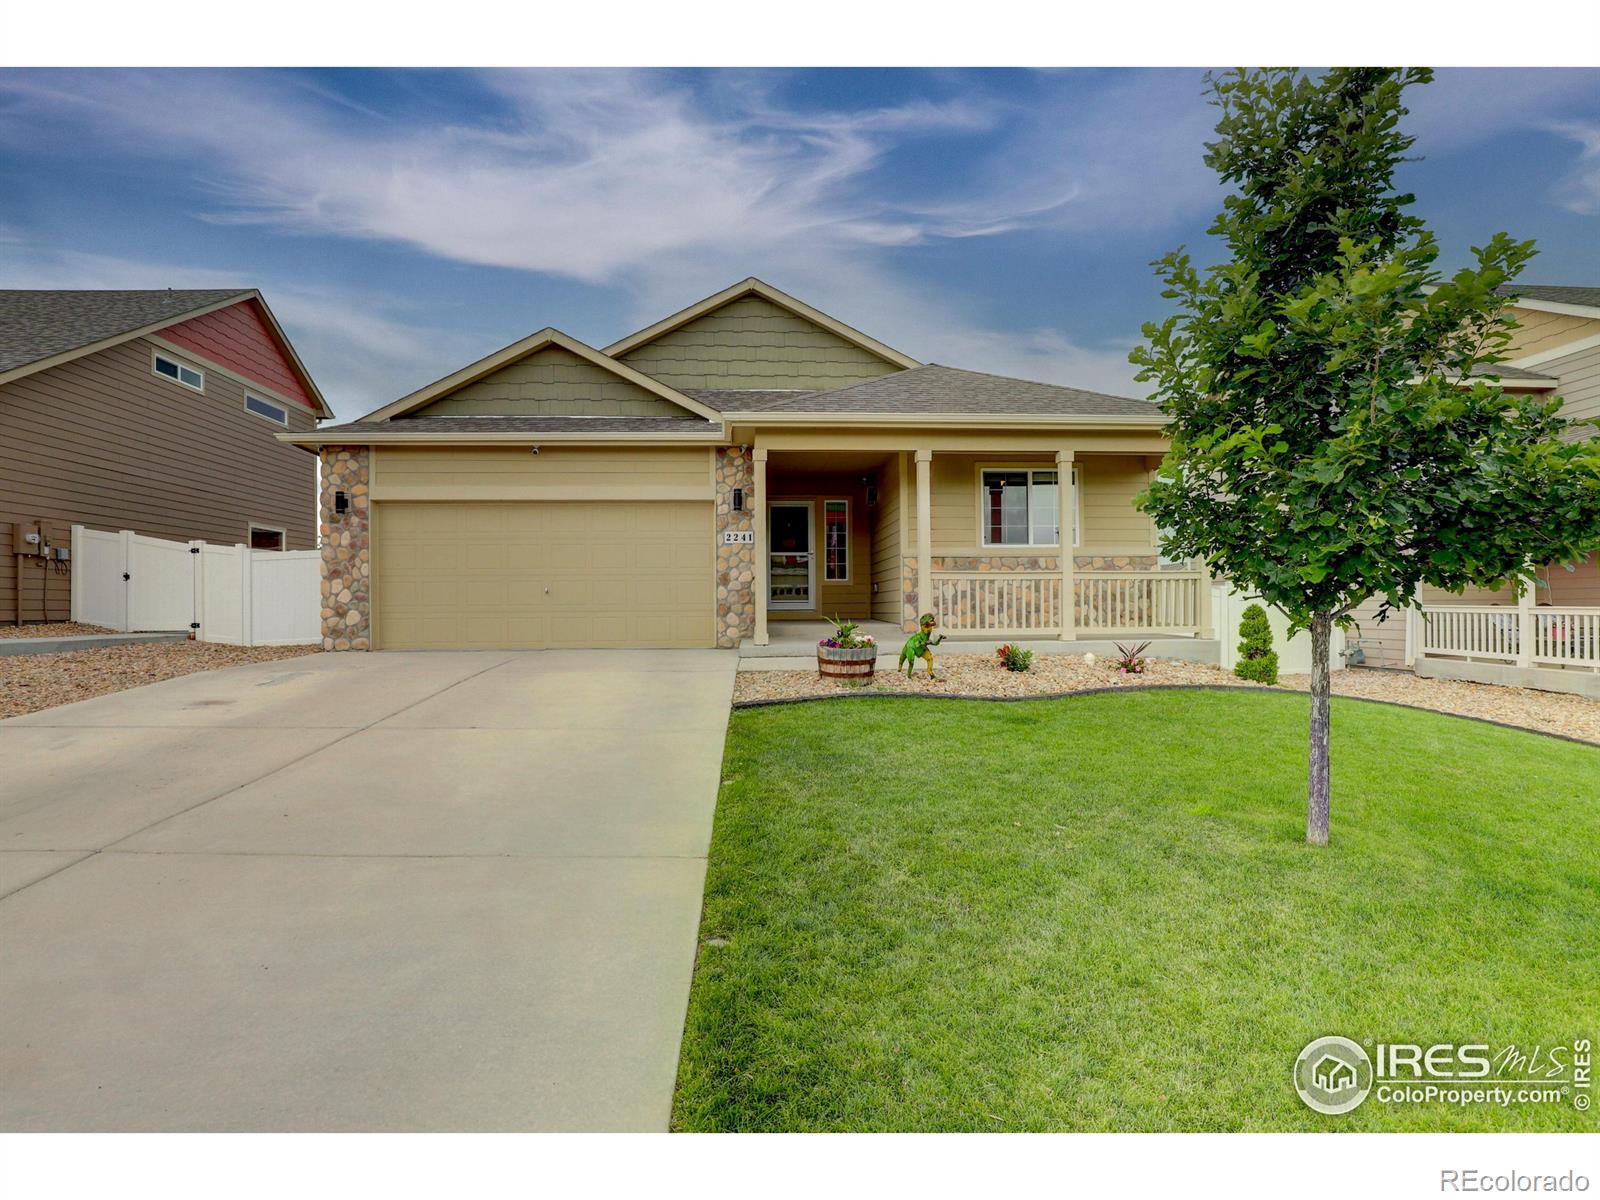 2241  75th Avenue, greeley MLS: 123456789992376 Beds: 4 Baths: 3 Price: $480,000